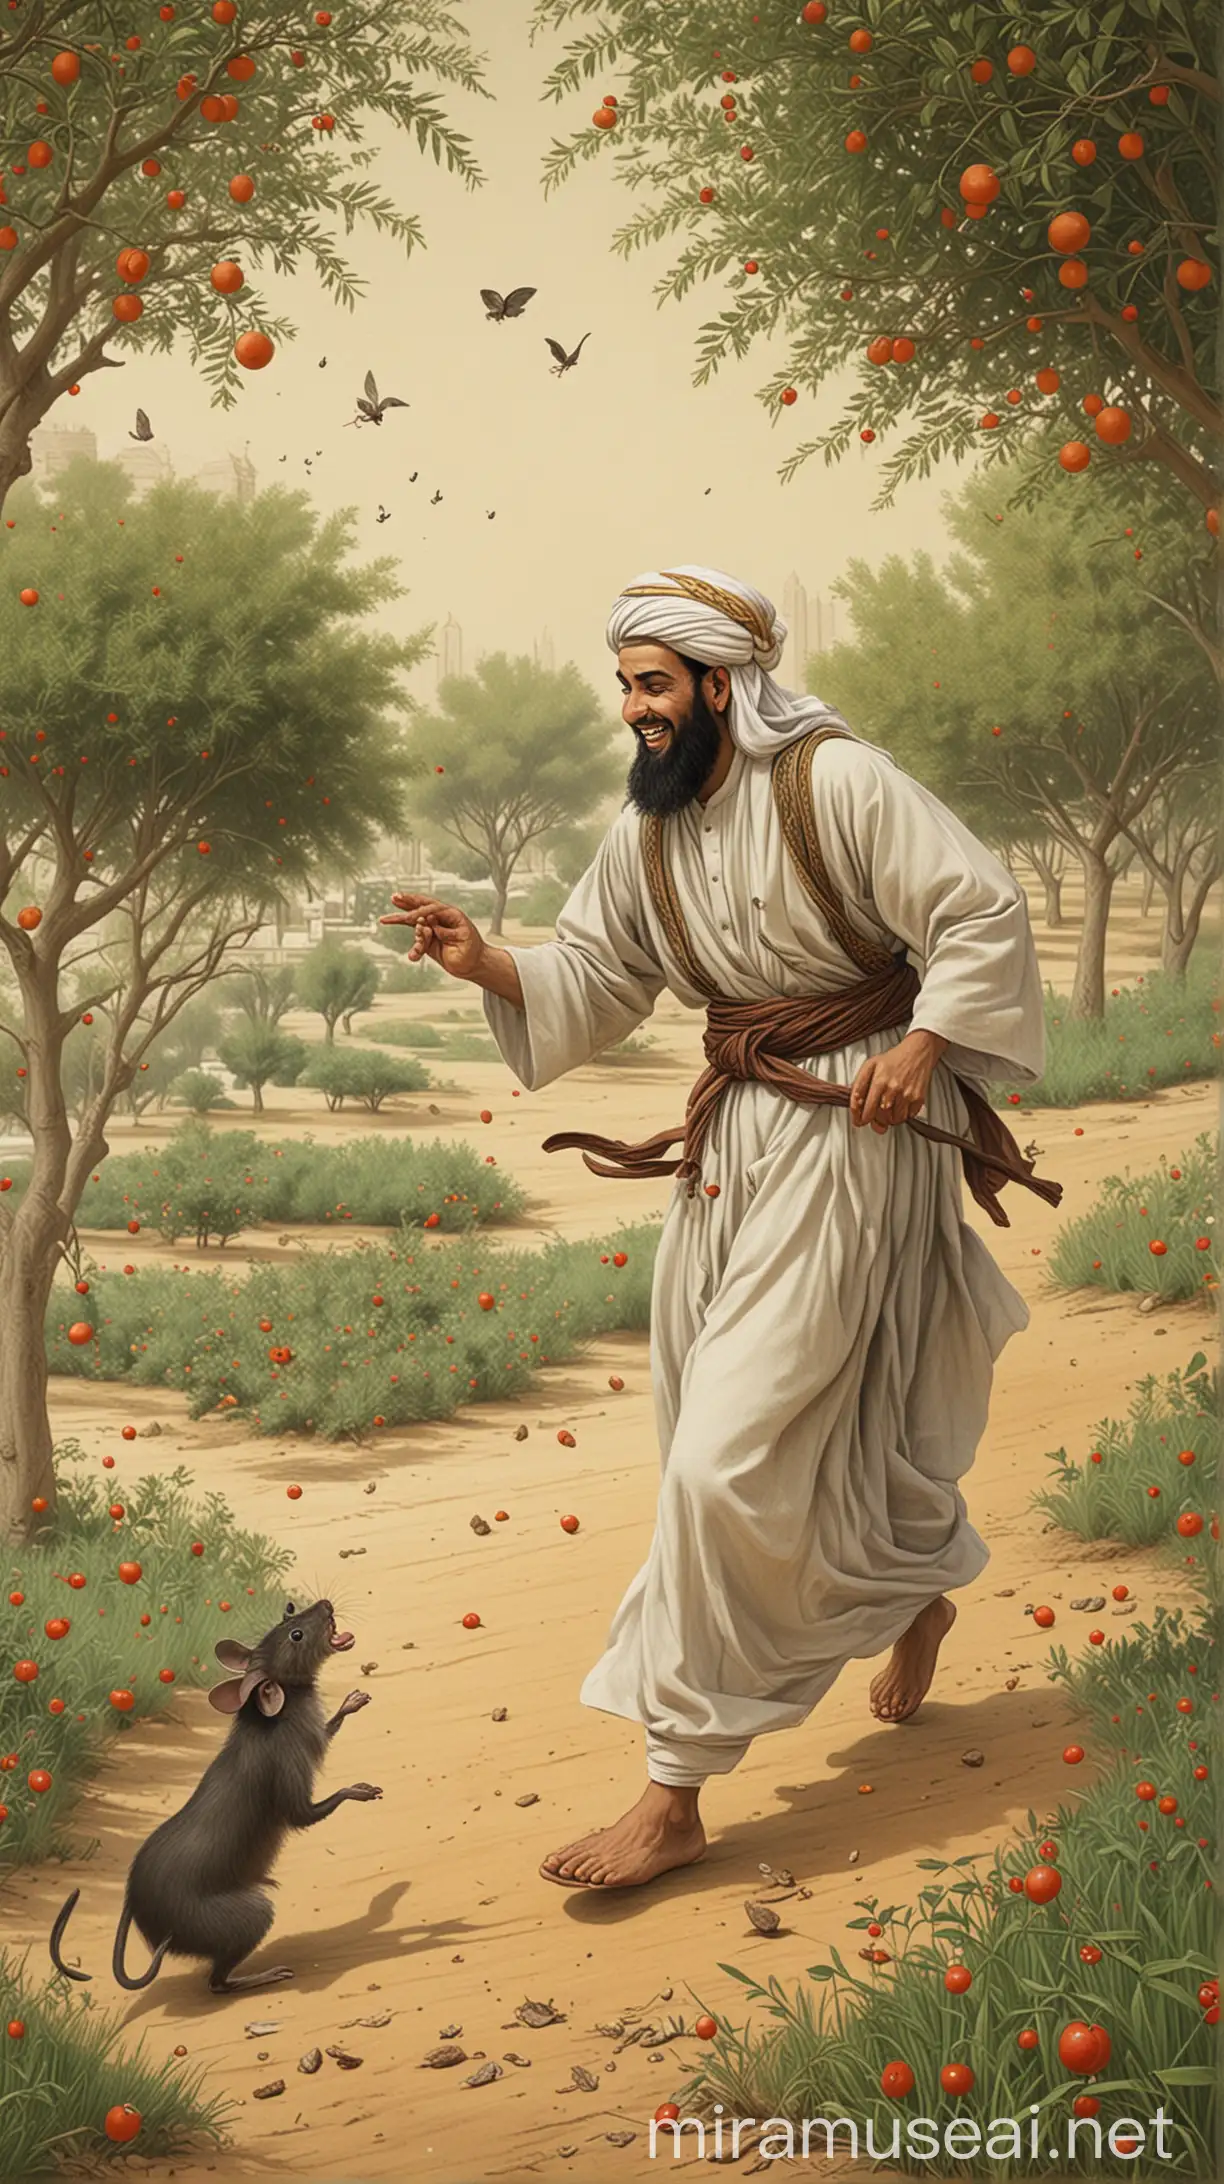 Hazrat Abu Huraira RA Playfully Chasing a Mischievous Mouse in a Date Orchard